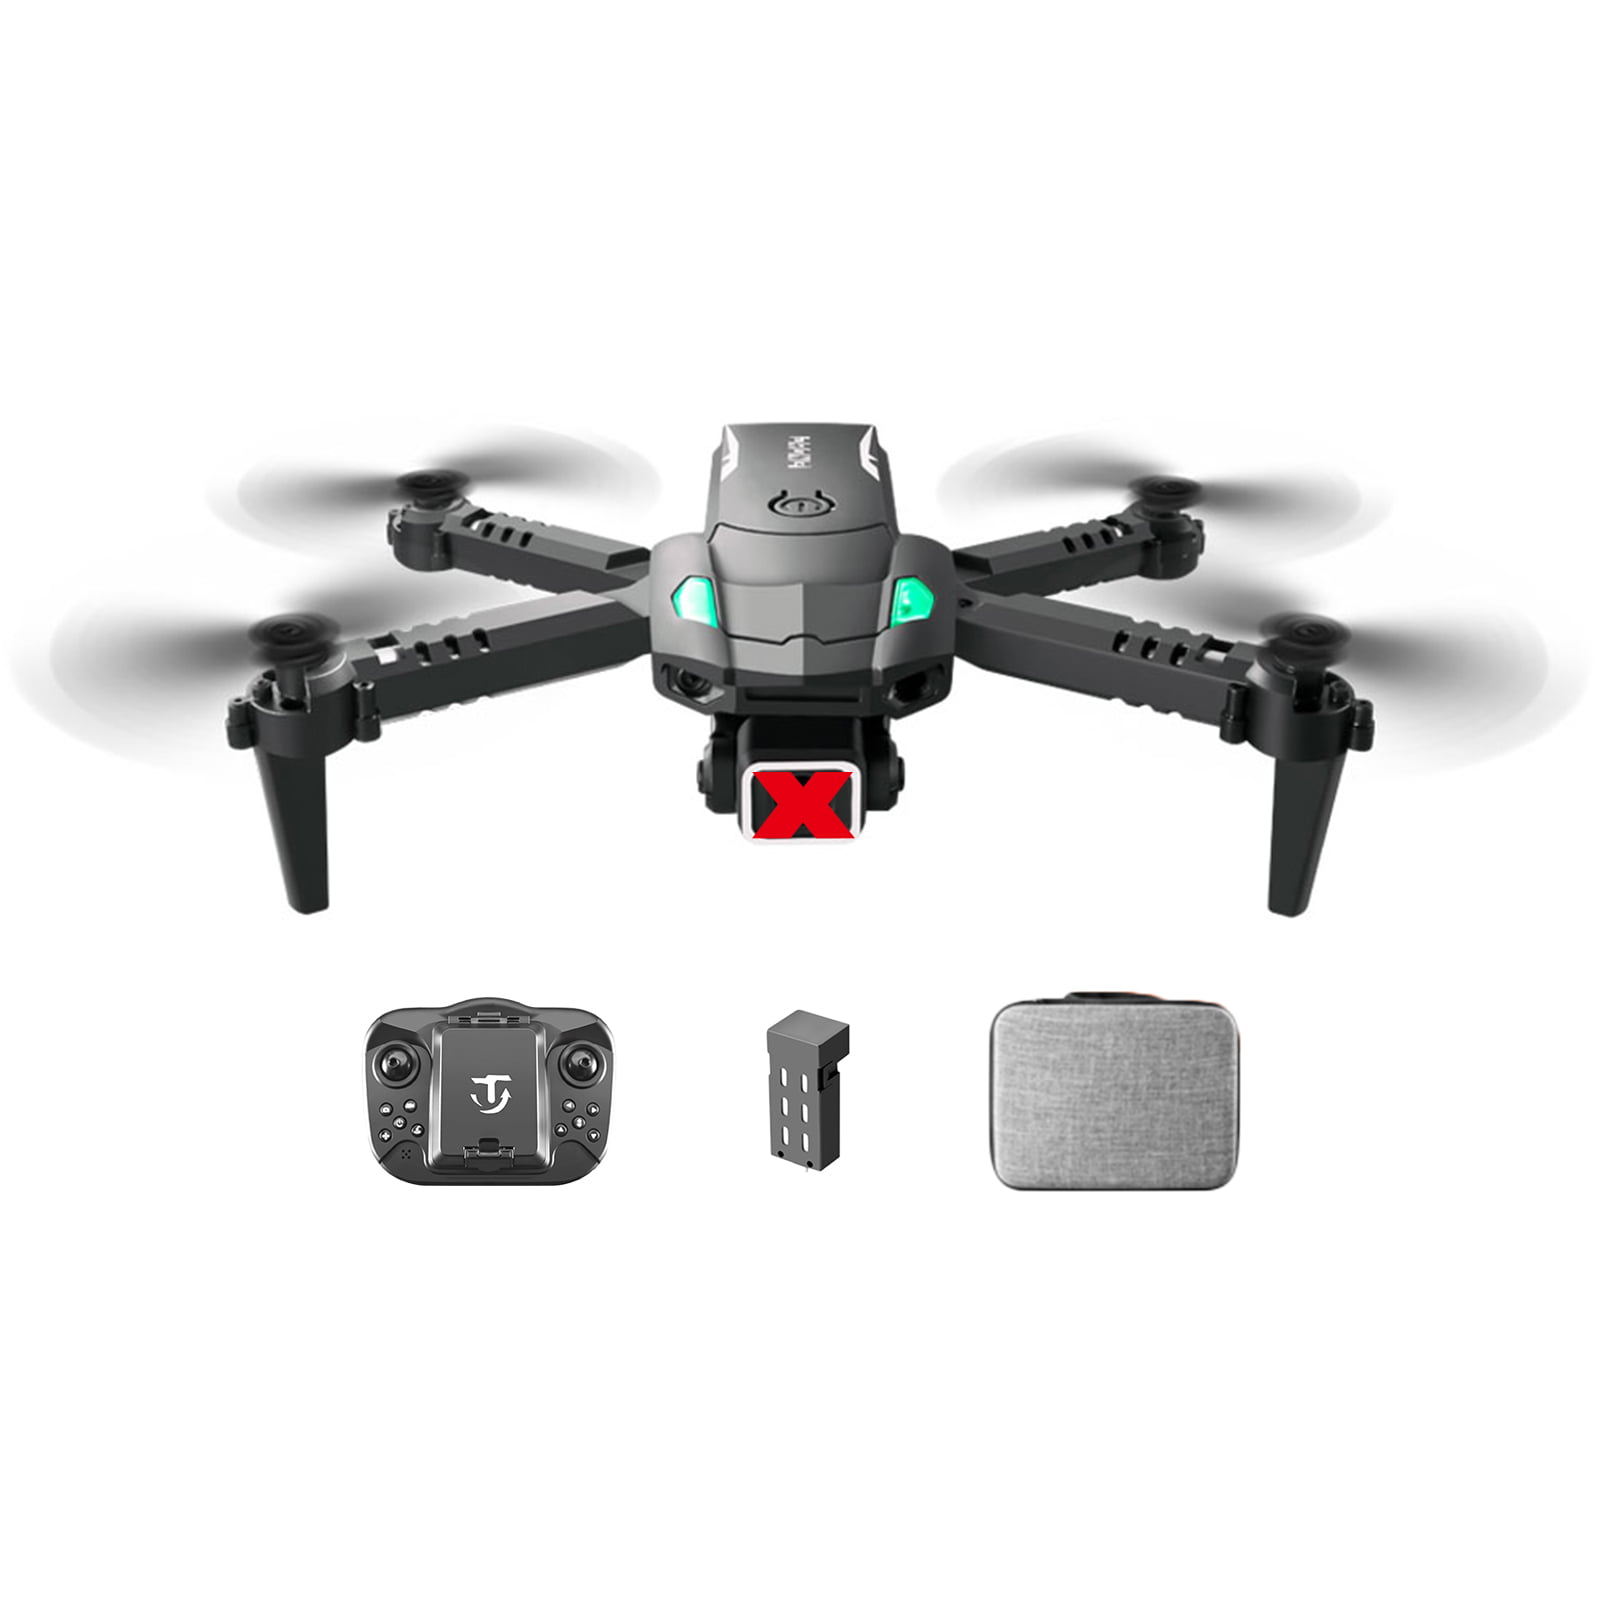 Mojoyce Smart Obstacle Avoidance Foldable Drone